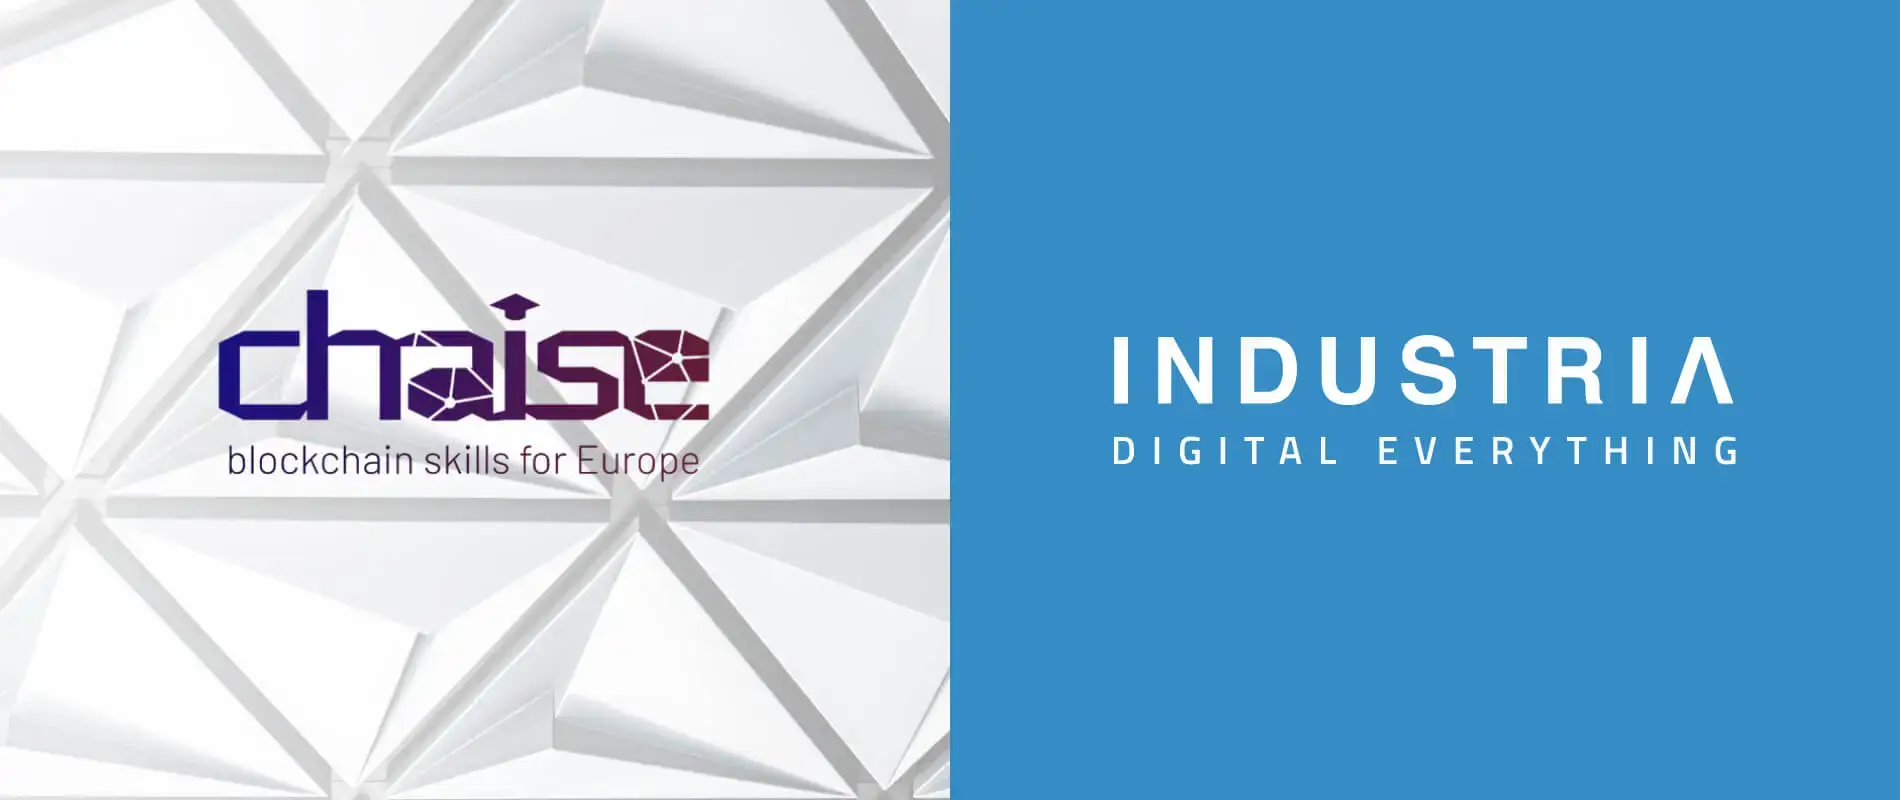 INDUSTRIA Joins CHAISE Consortium to Design Europe’s Strategy for Blockchain Skills